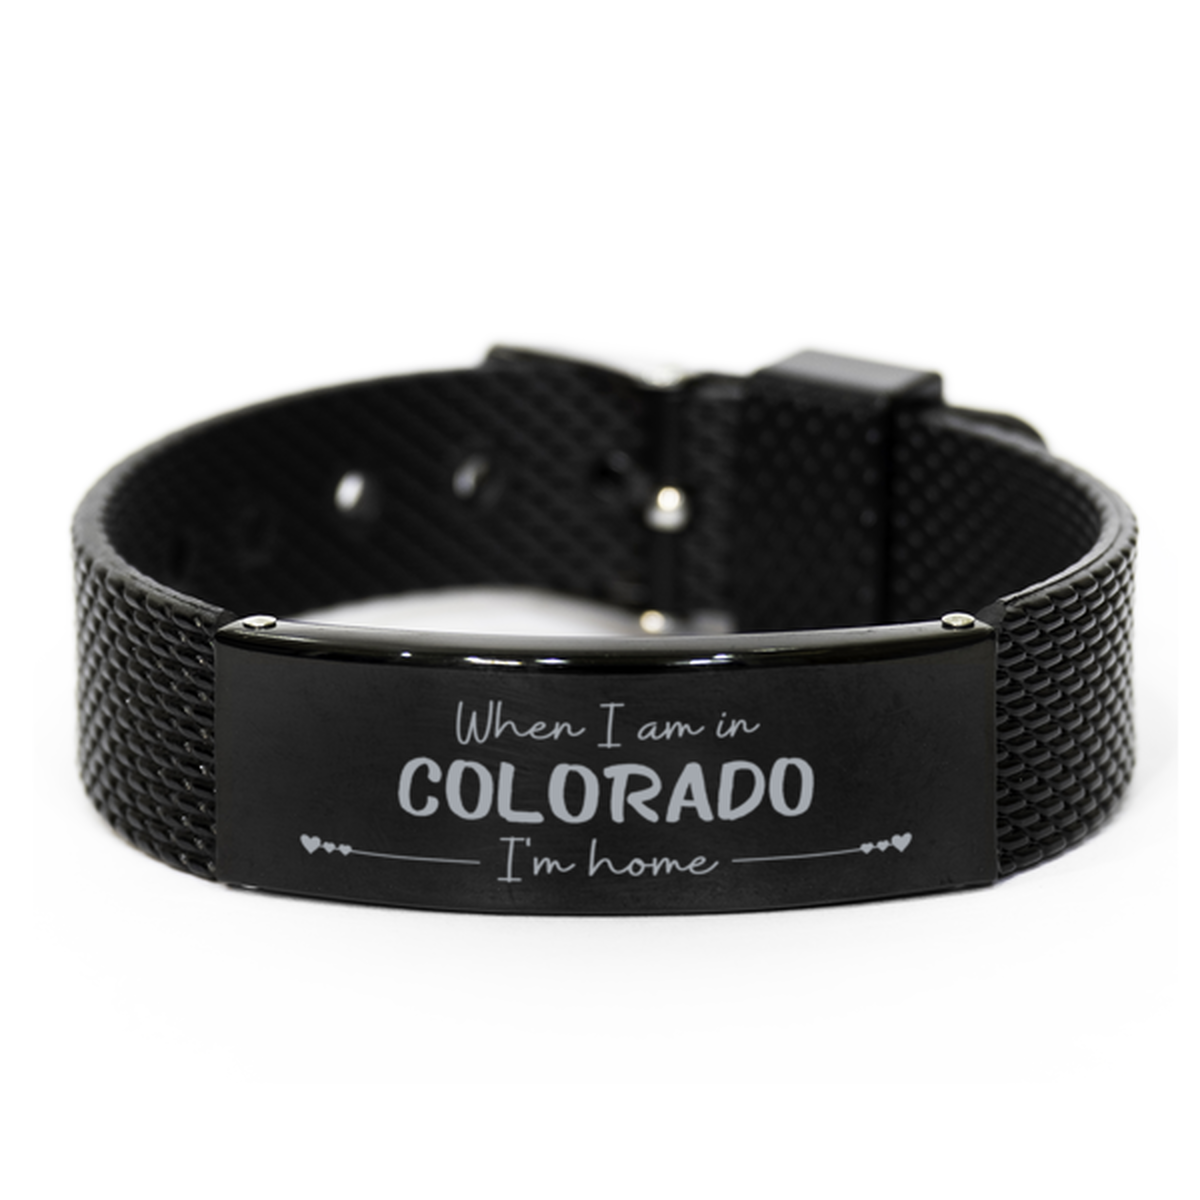 When I am in Colorado I'm home Black Shark Mesh Bracelet, Cheap Gifts For Colorado, State Colorado Birthday Gifts for Friends Coworker